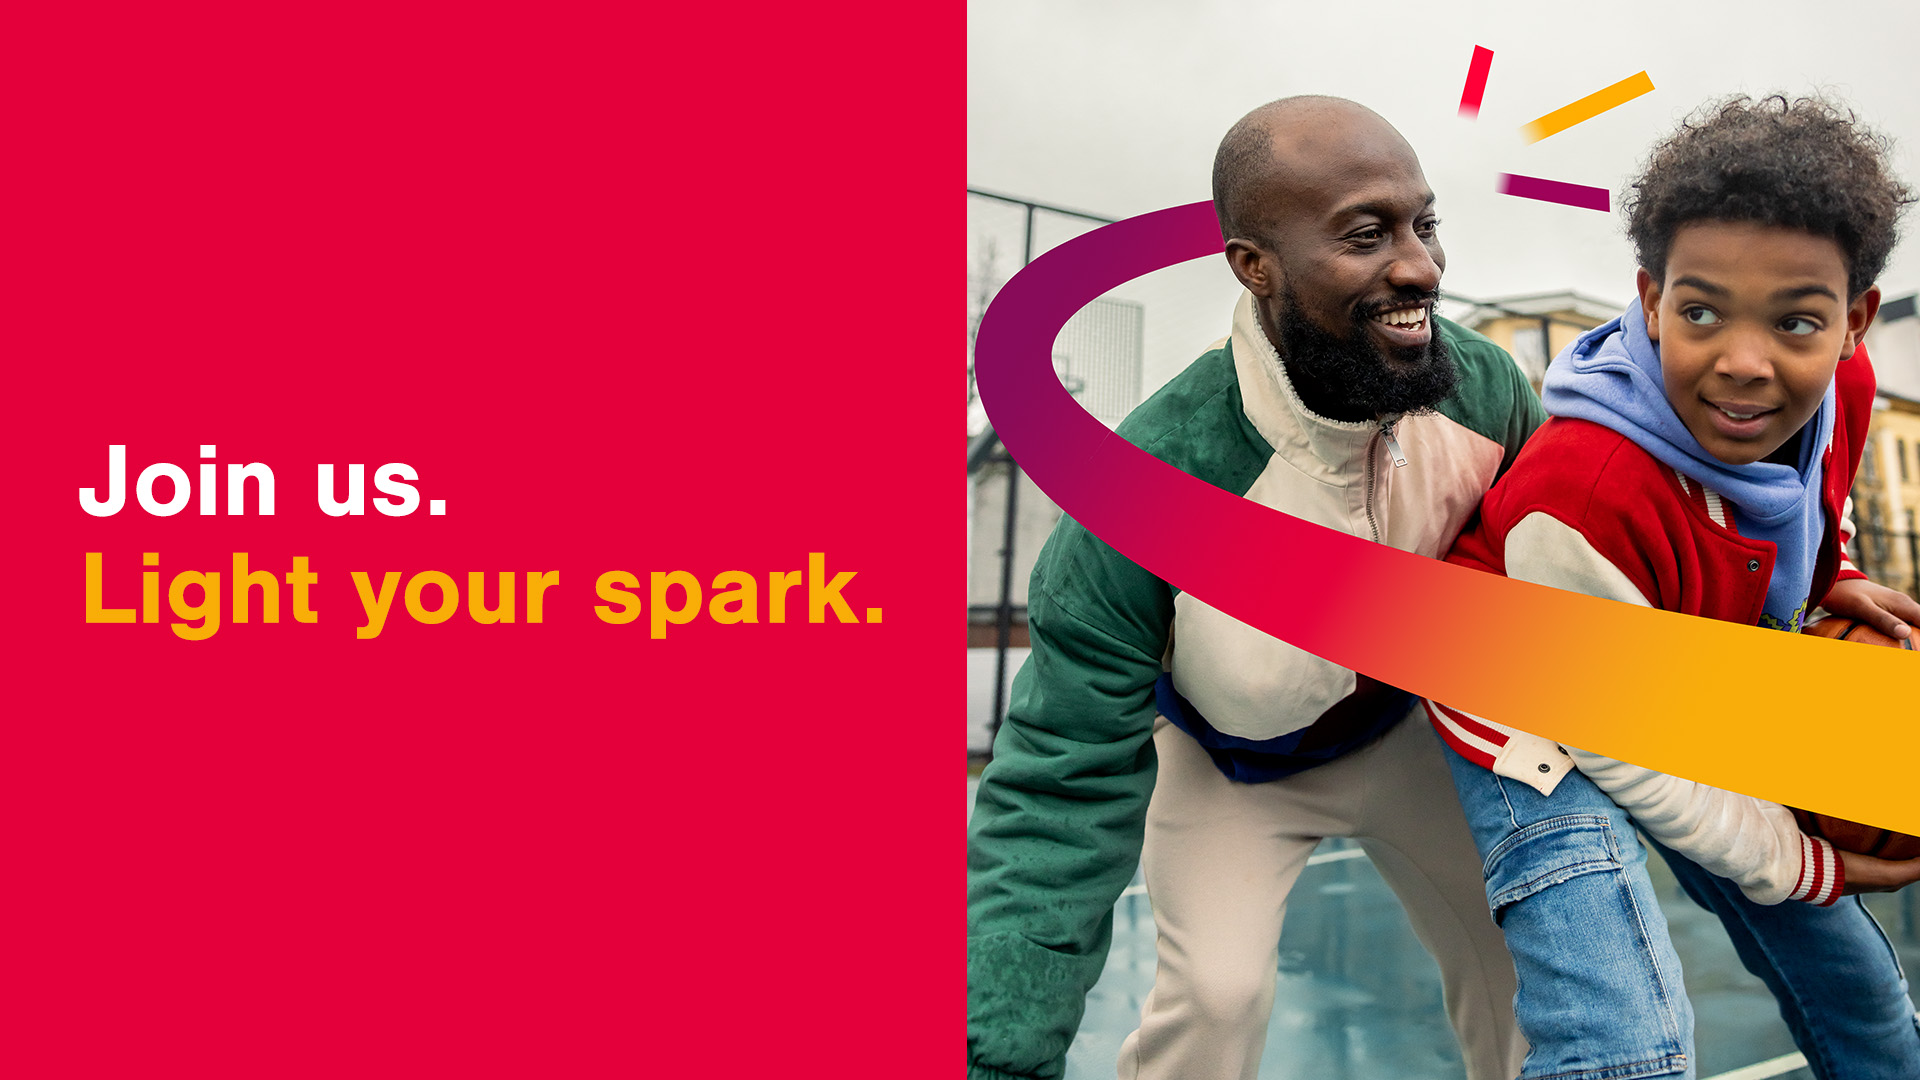 Join us. Light your spark.